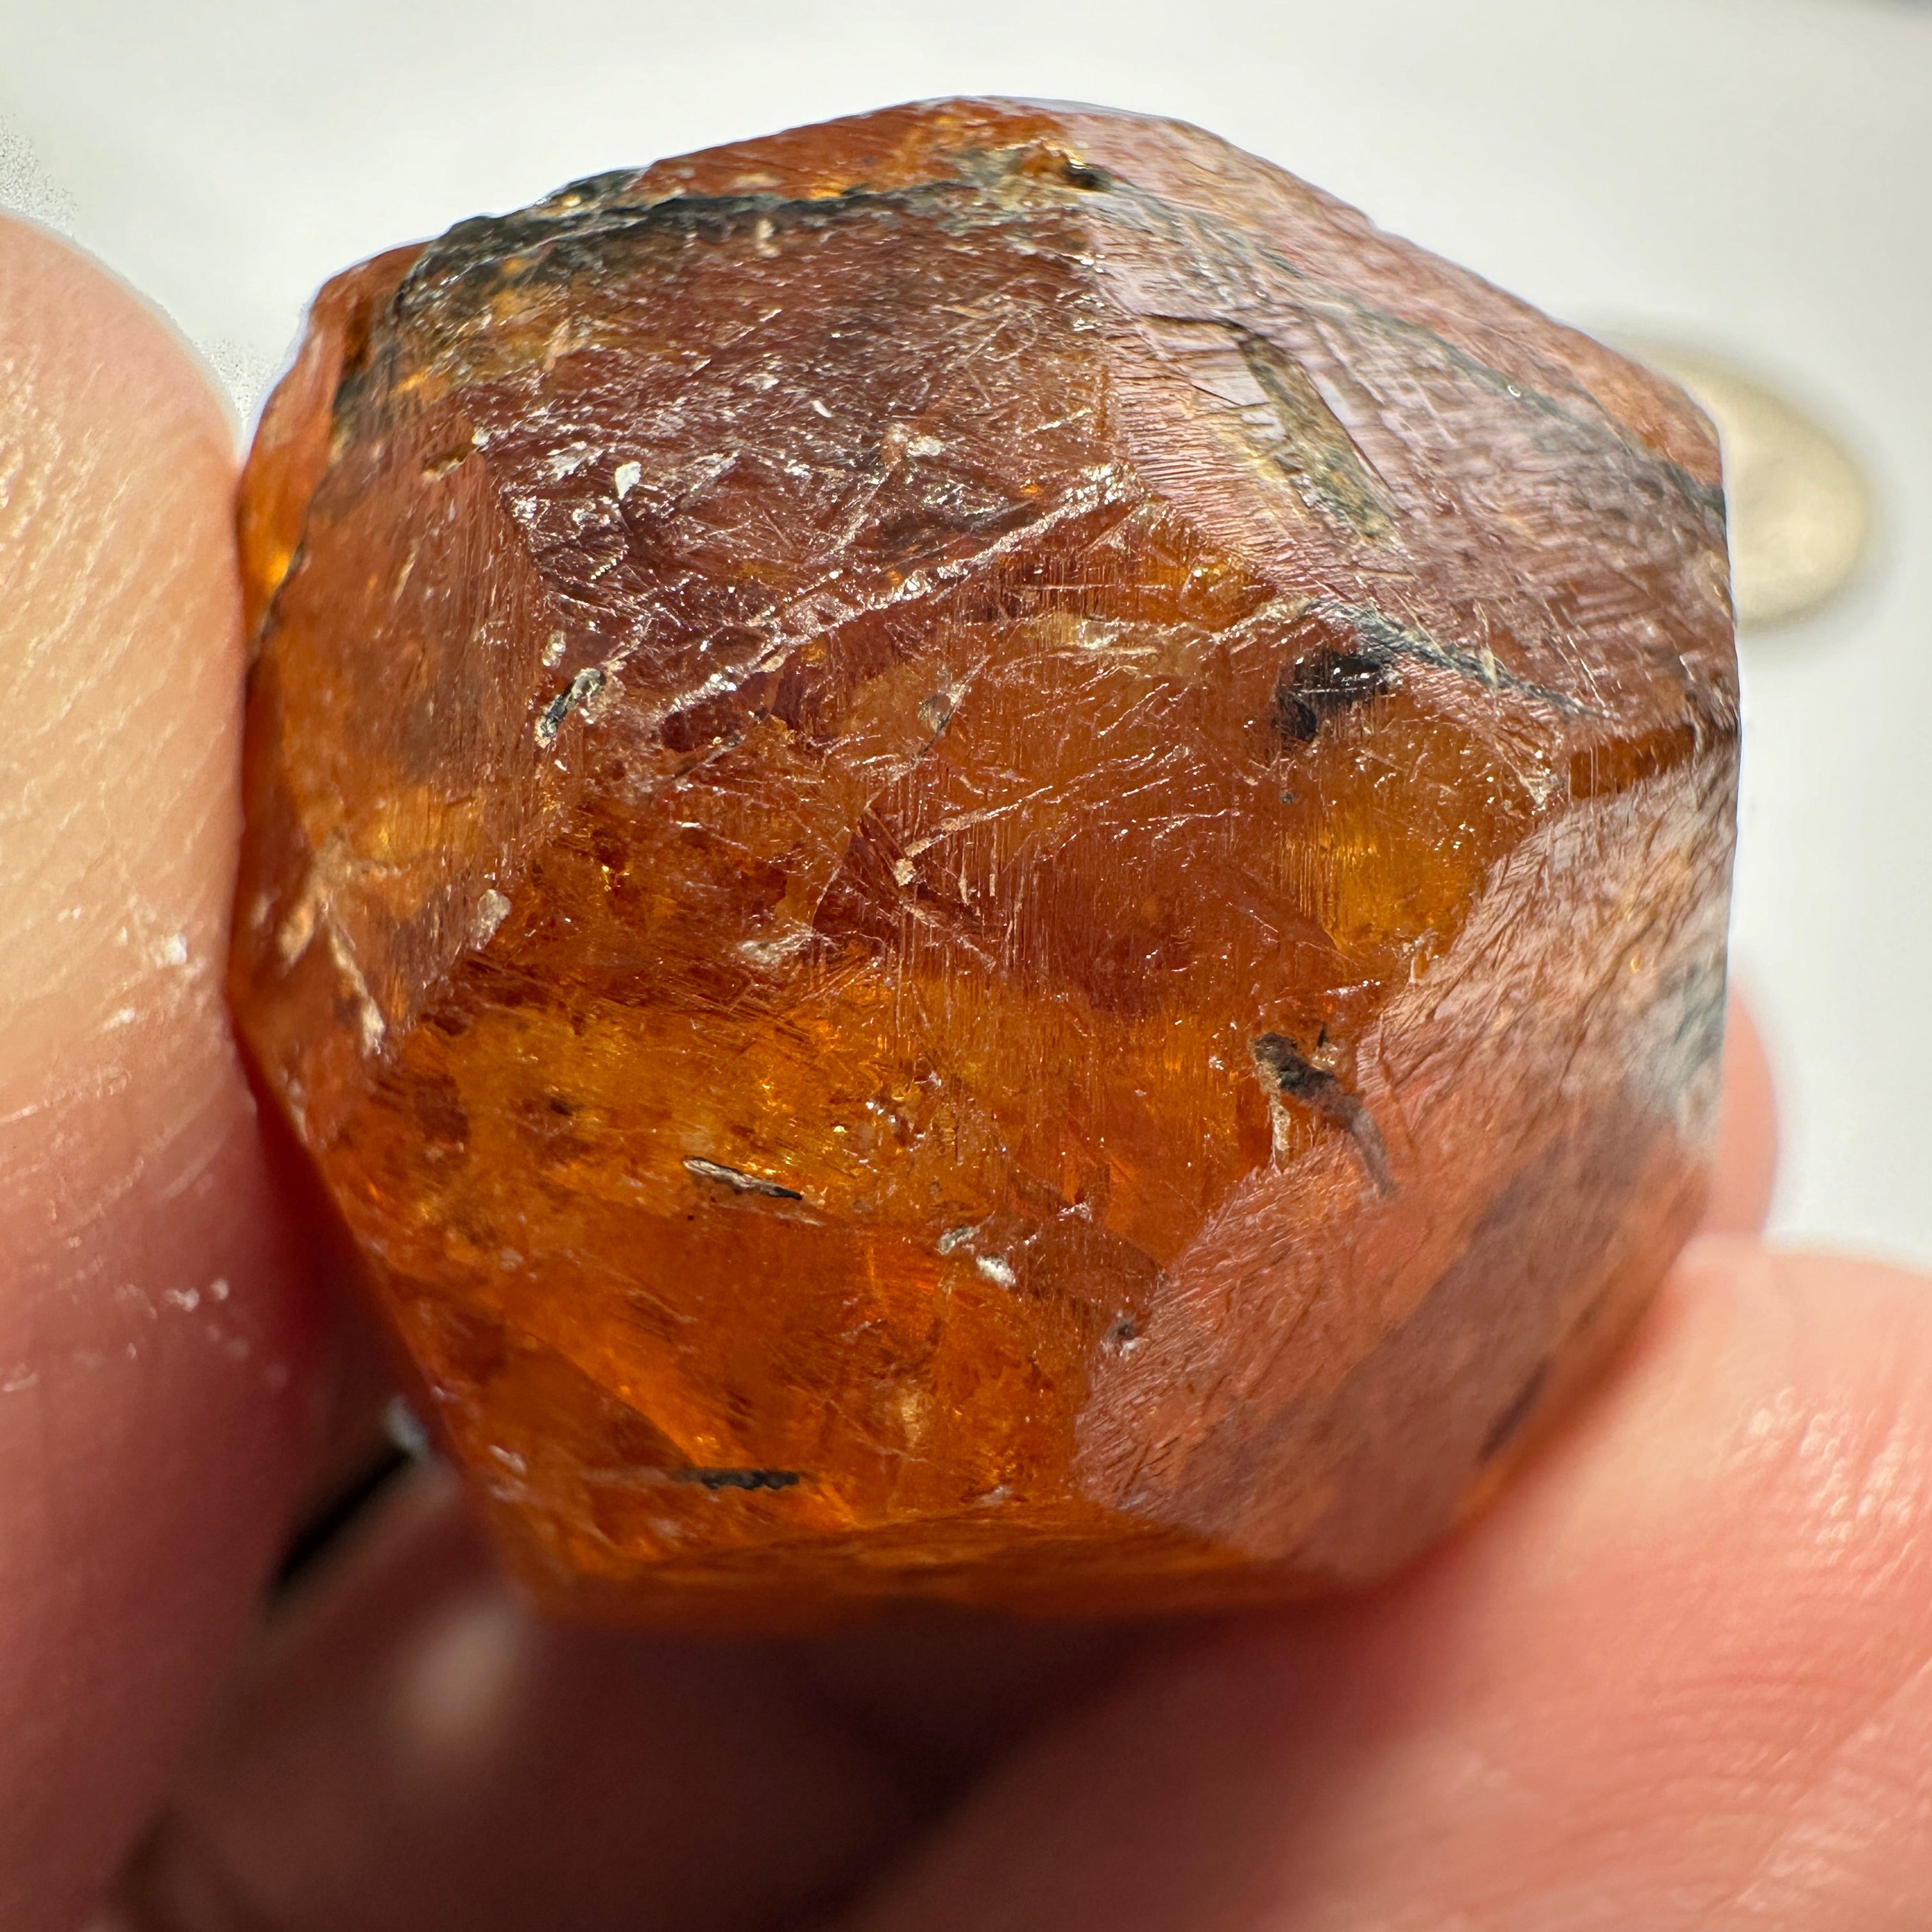 144.00ct / 28.80gm Spessartite Garnet Crystal, Loliondo, Tanzania. 25 x 20 x 23 mm. Facetable portions, Untreated Unheated